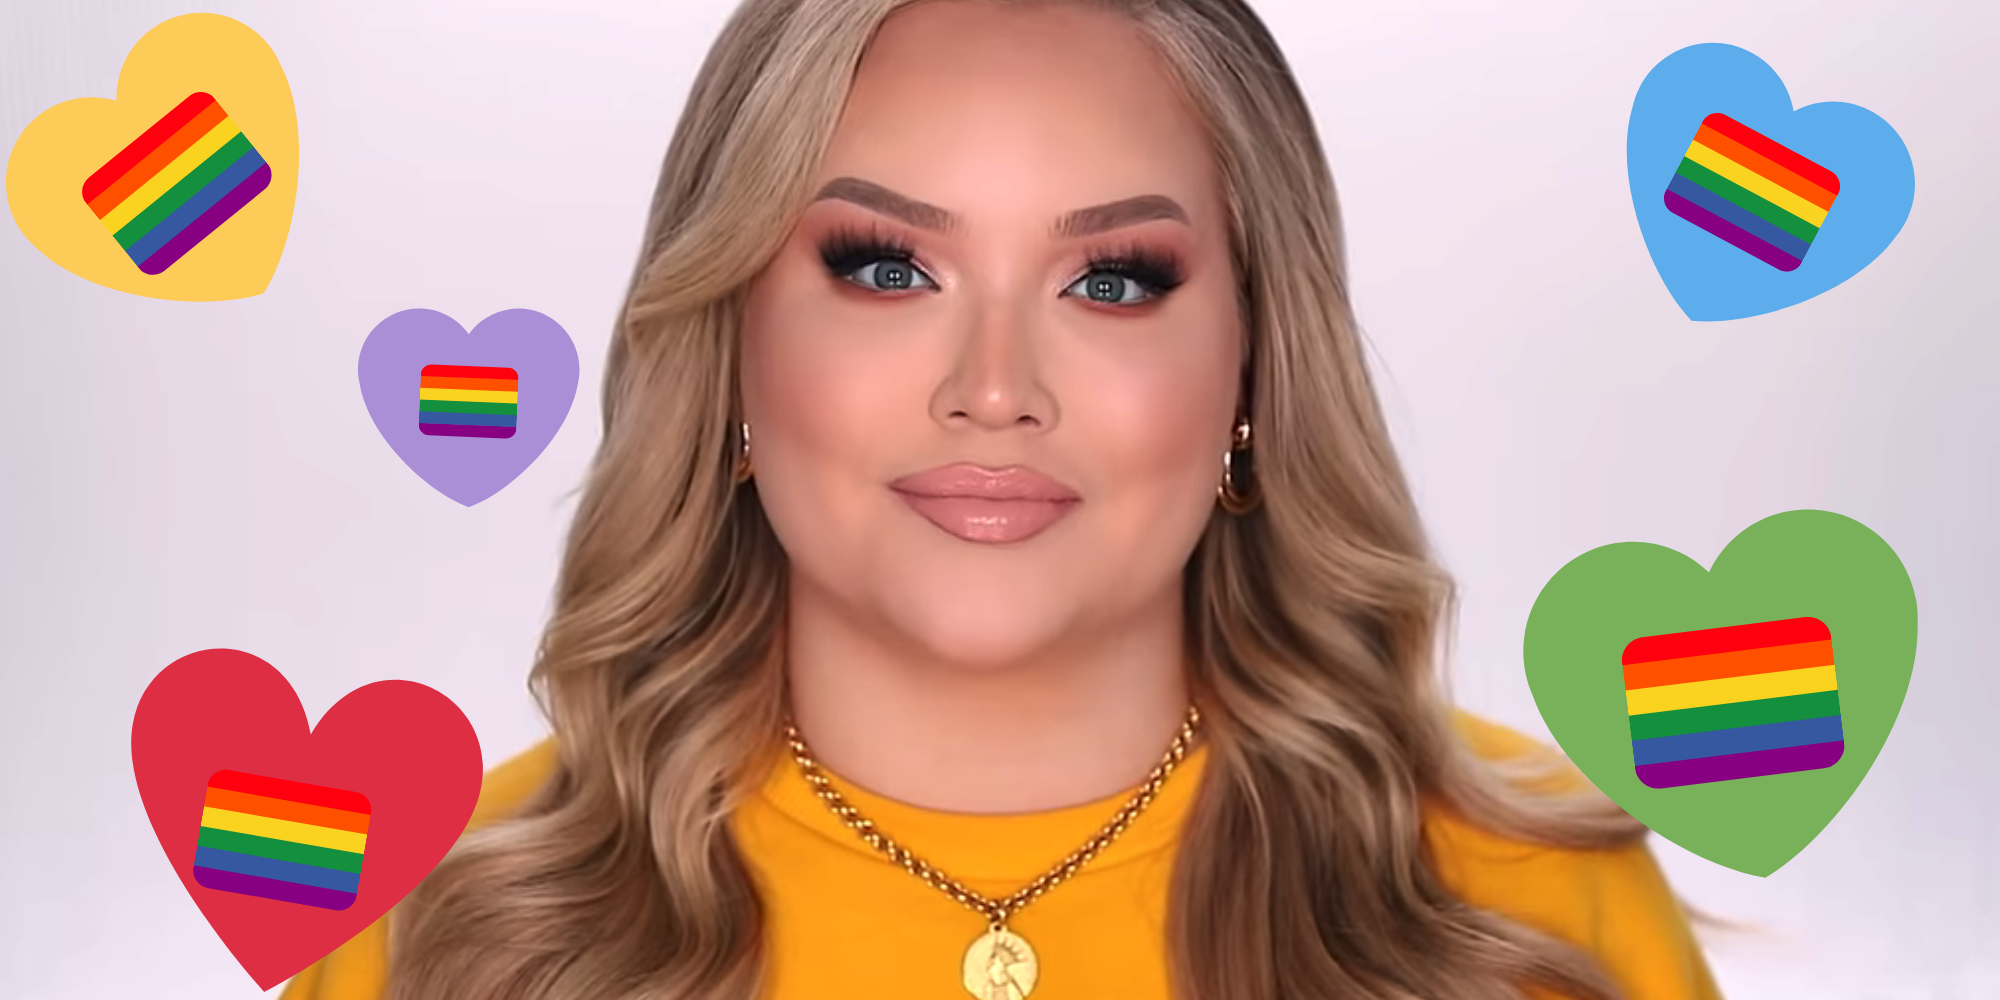 Youtuber Nikkietutorials Comes Out As Trans In New Video After Being